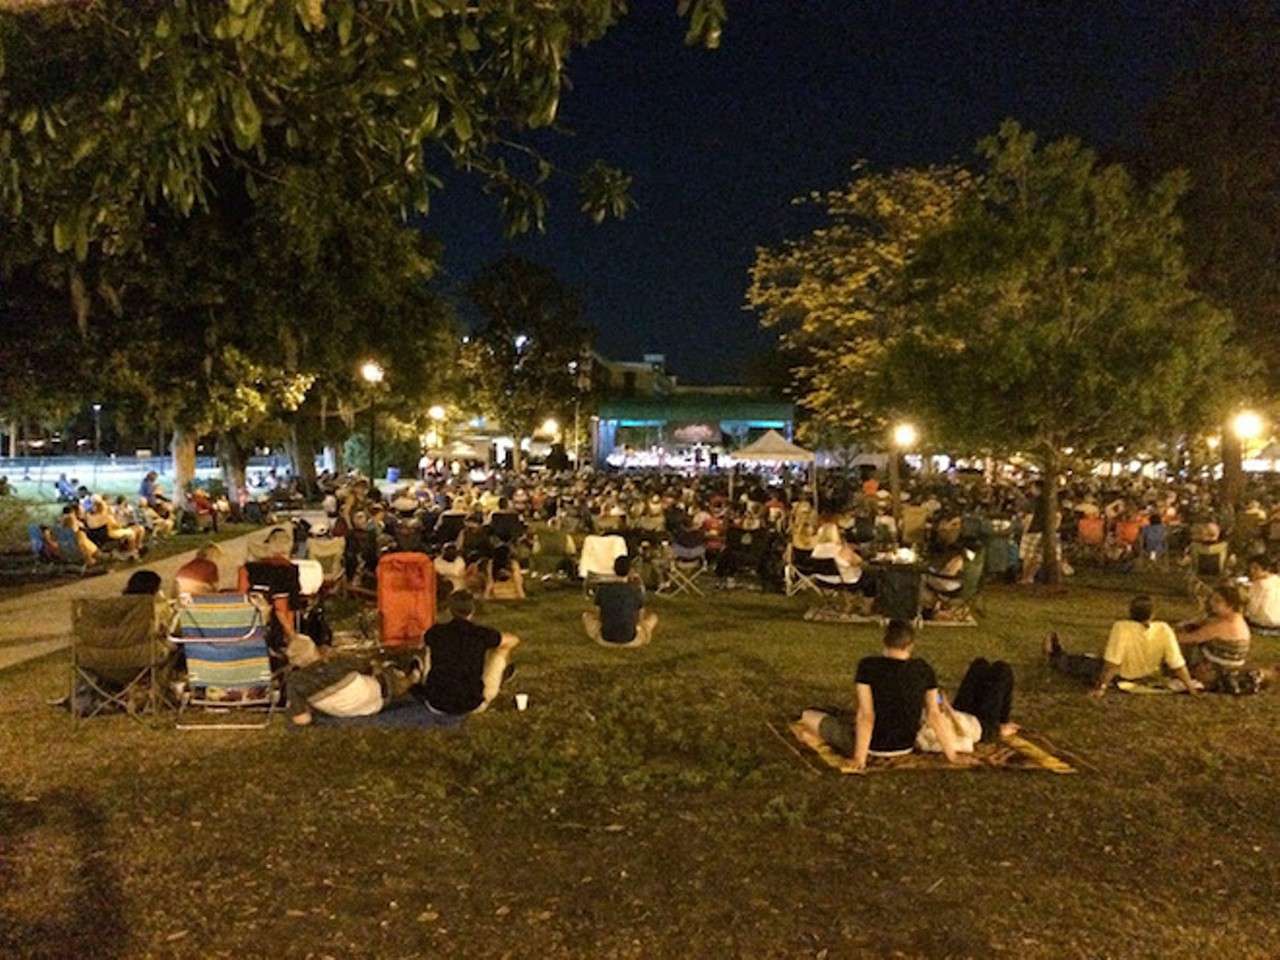 Free concert by the Orlando Philharmonic Orchestra at Winter Park's Central Park.